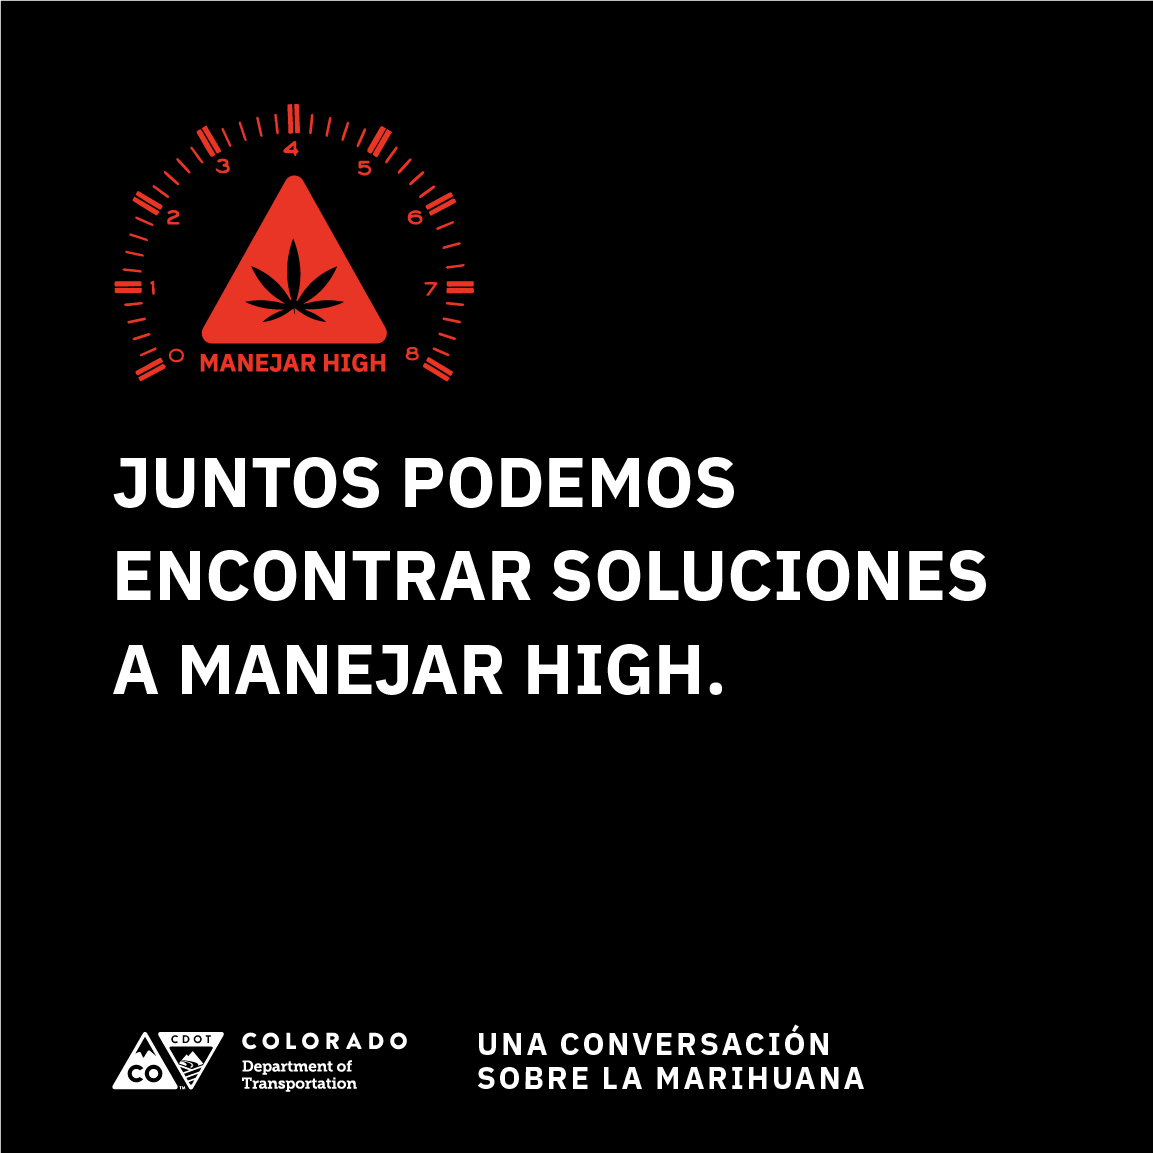 CD038_CannabisConversations_GraphicKit_Mech_v1_Spanish_Square_H.jpg detail image